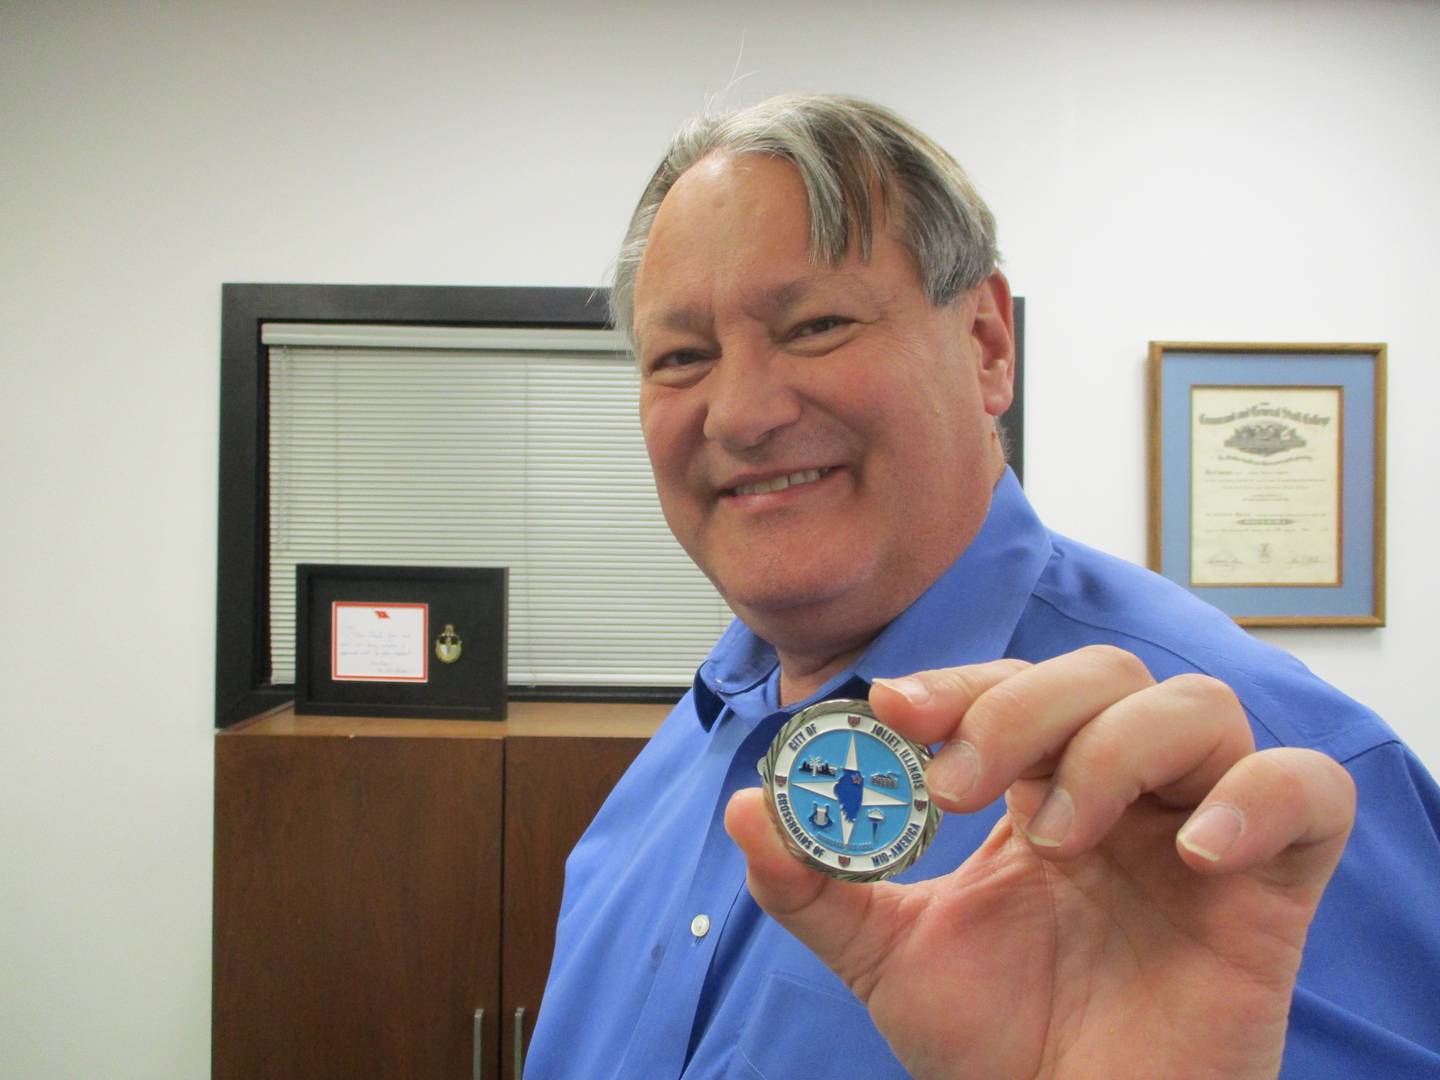 Joliet City Manager holds a commemorate city coin while in his office on March 17, 2022.